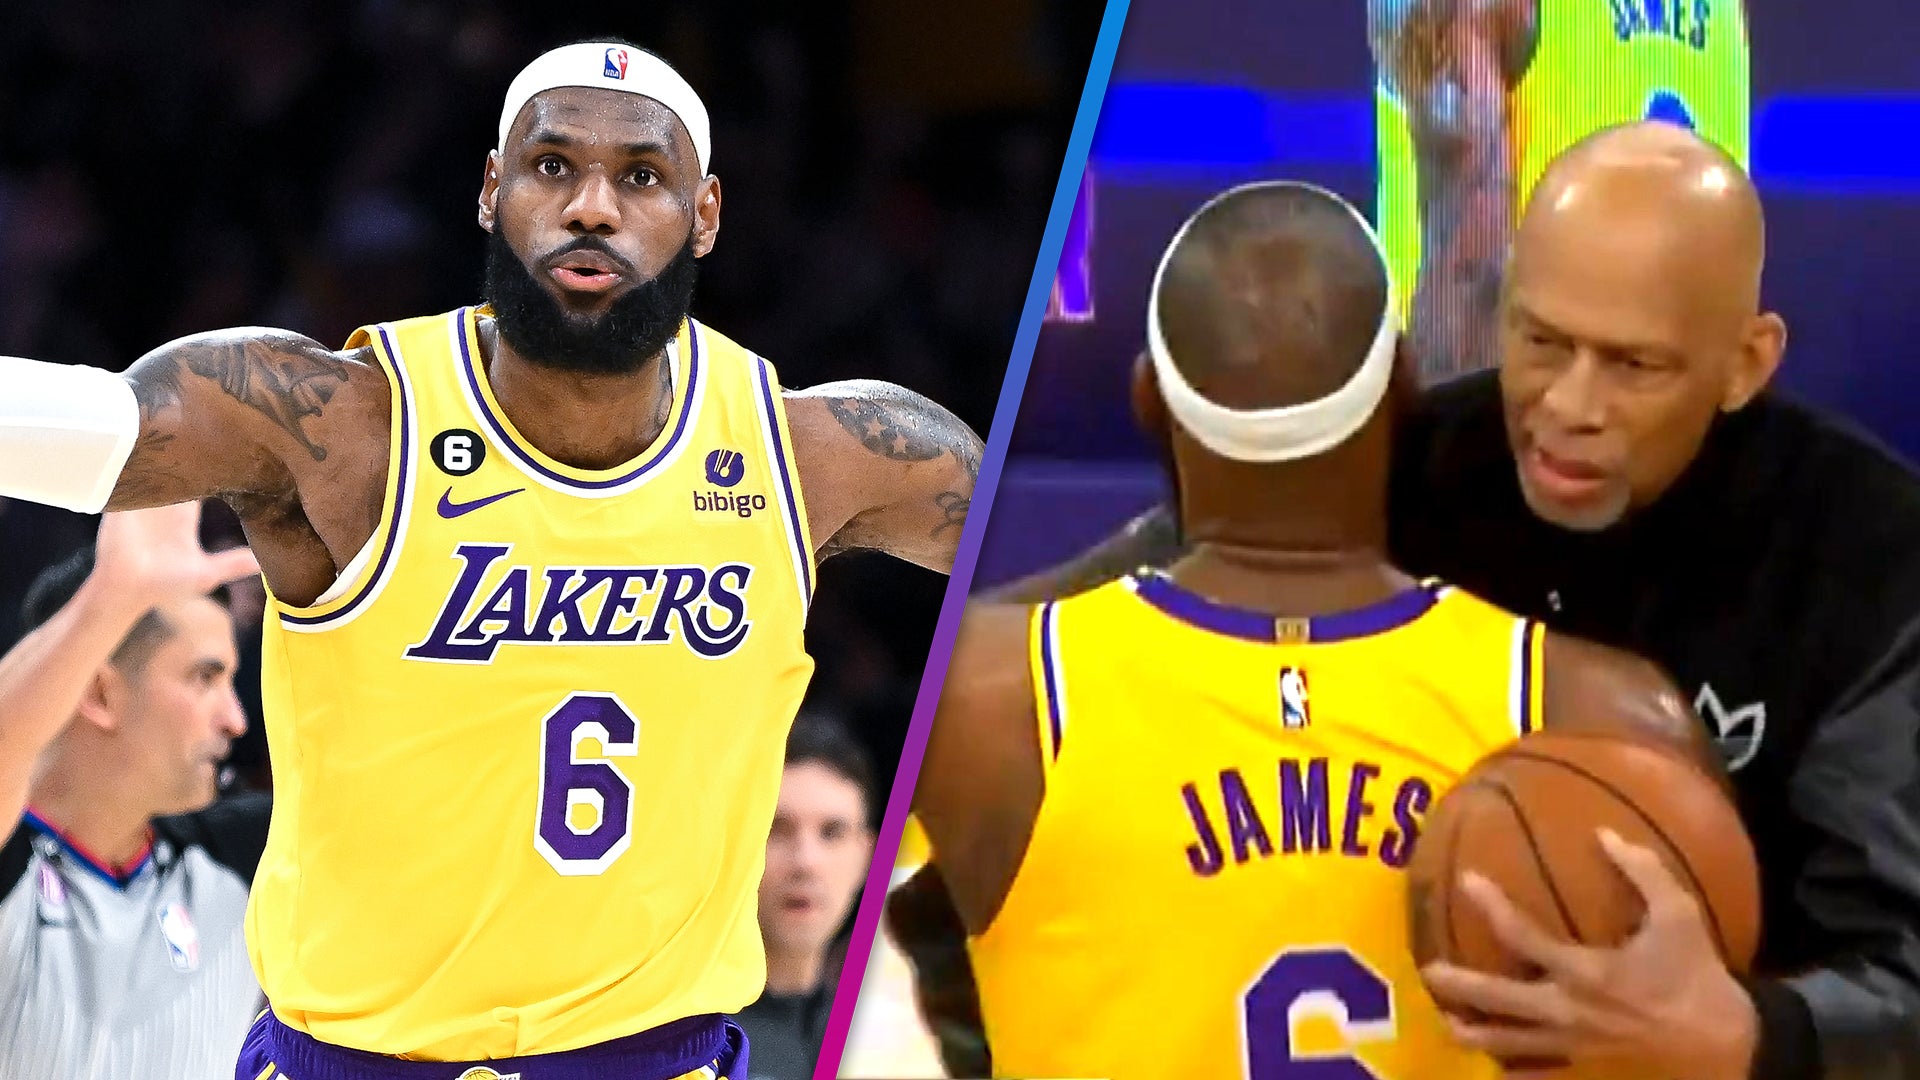 LeBron James retiring? Future for NBA star unclear after Lakers loss